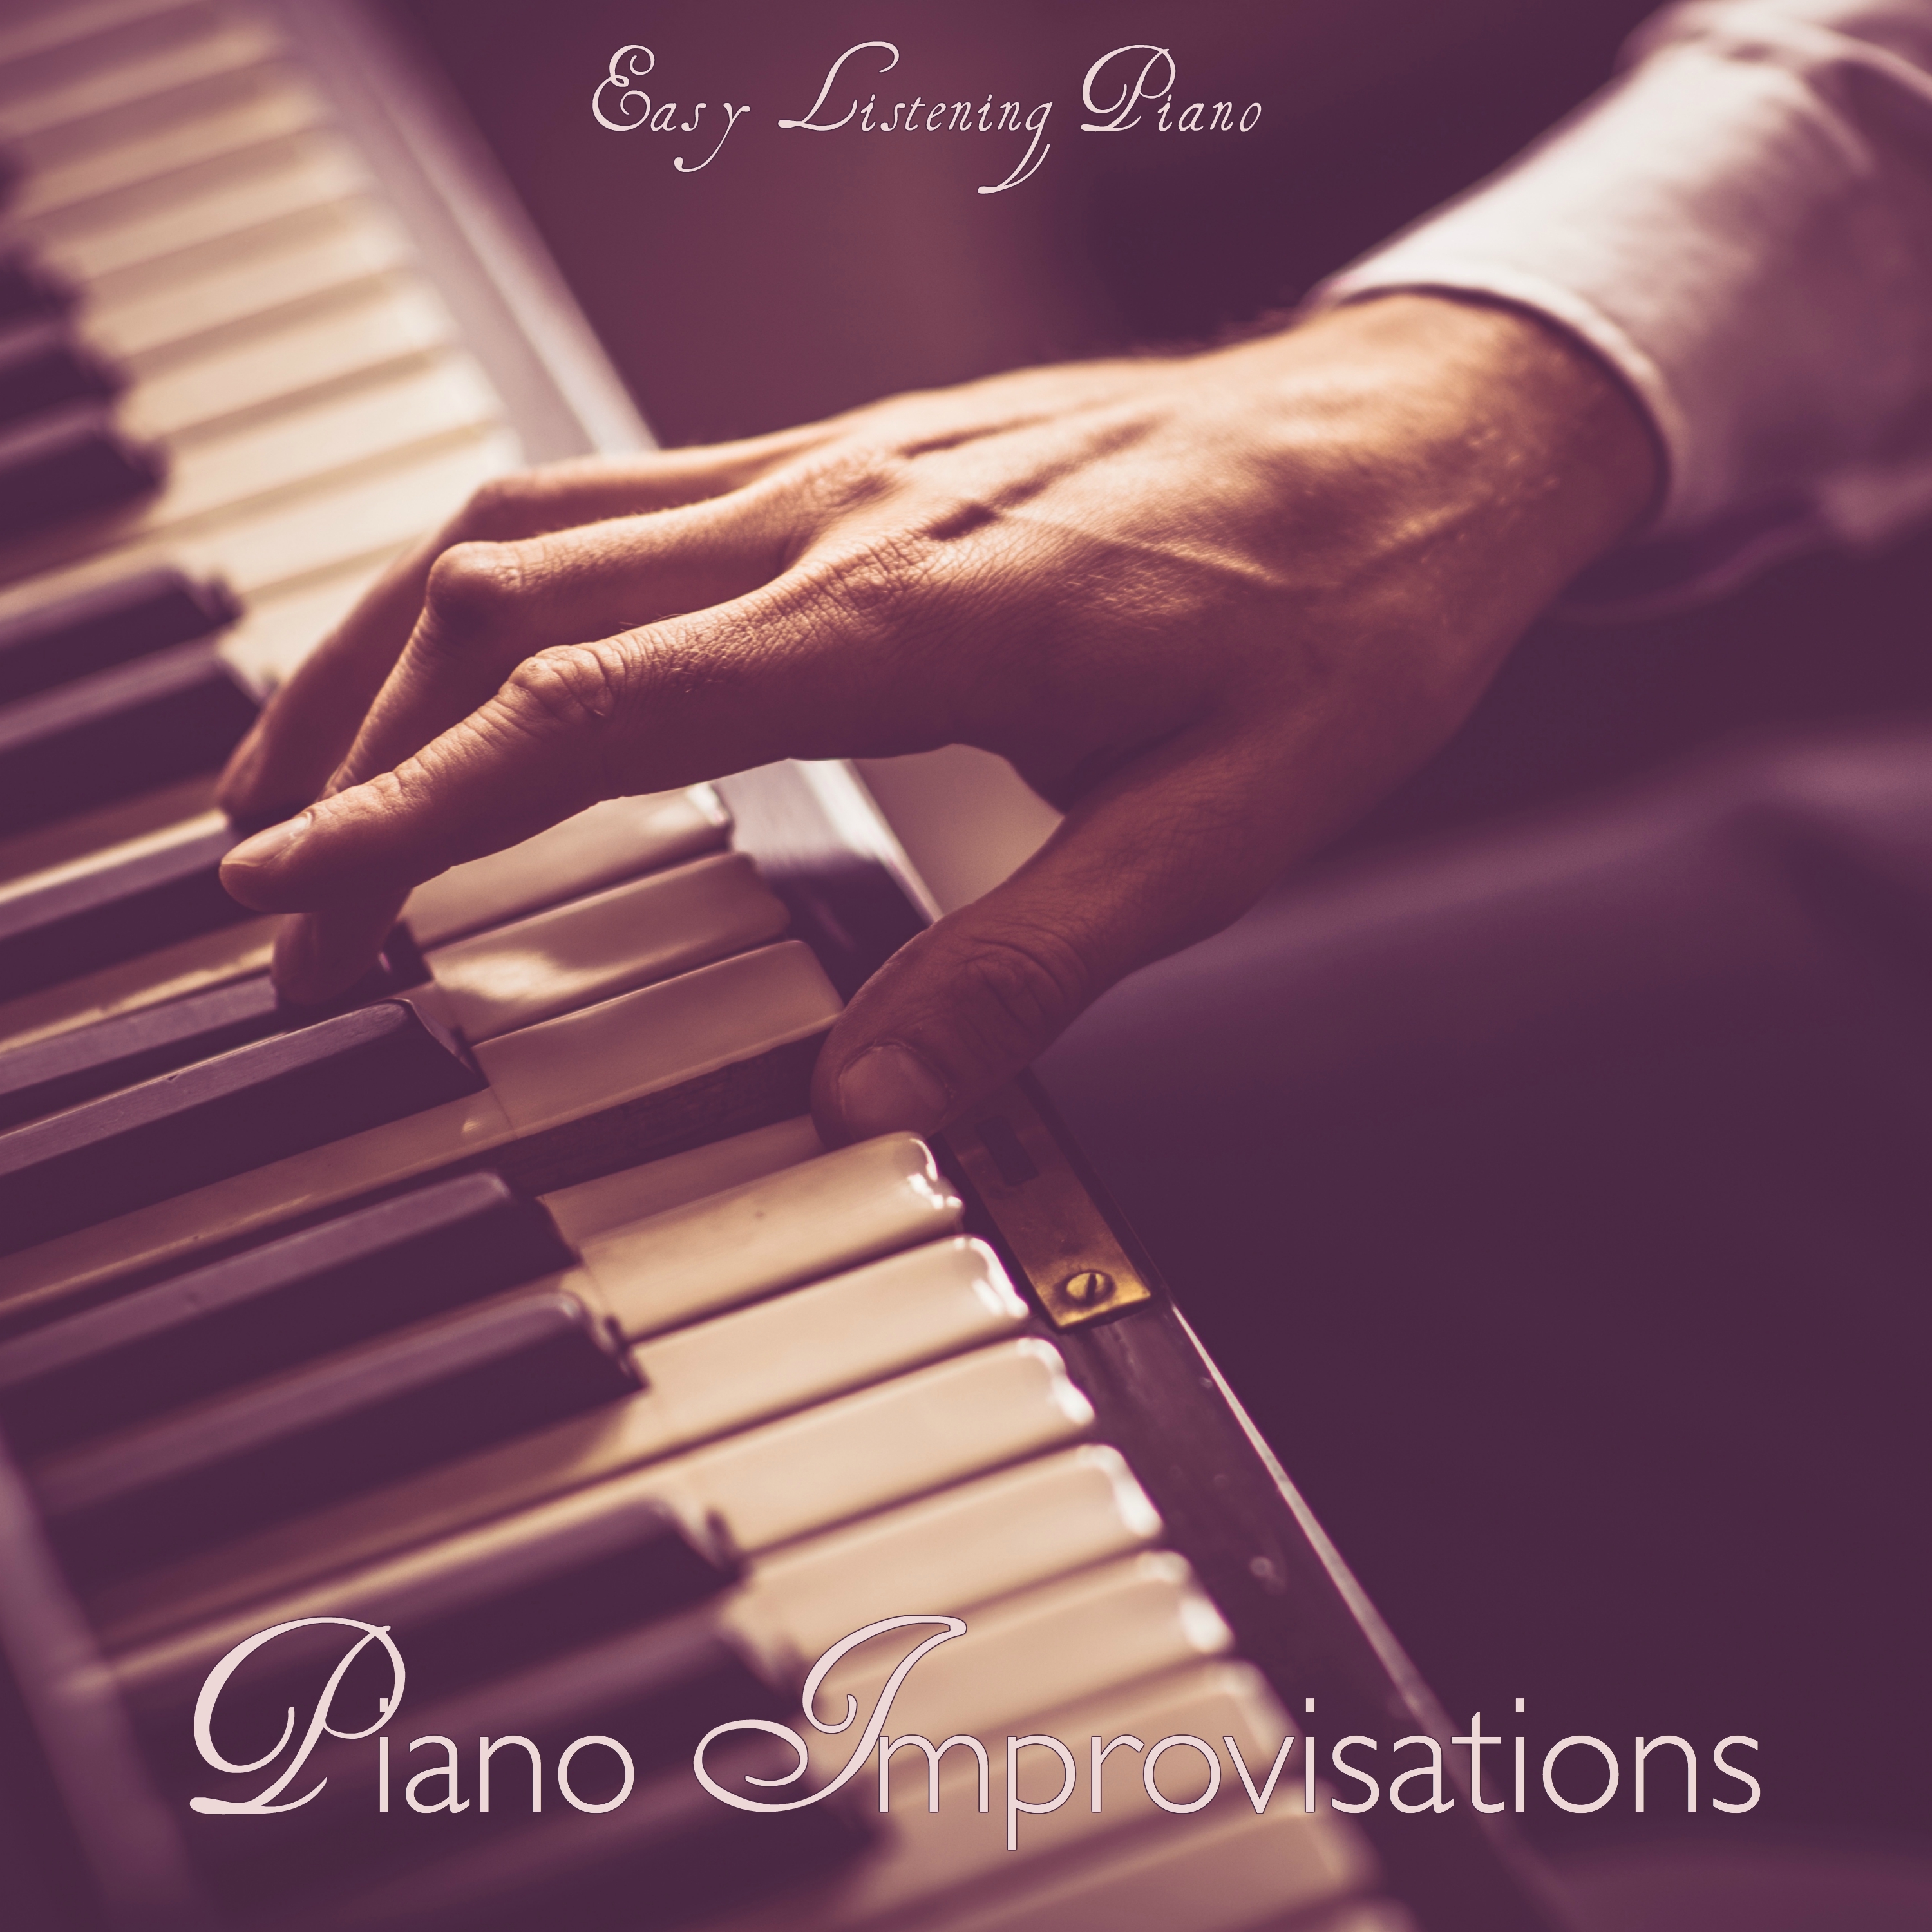 Loving You - Best Piano Songs